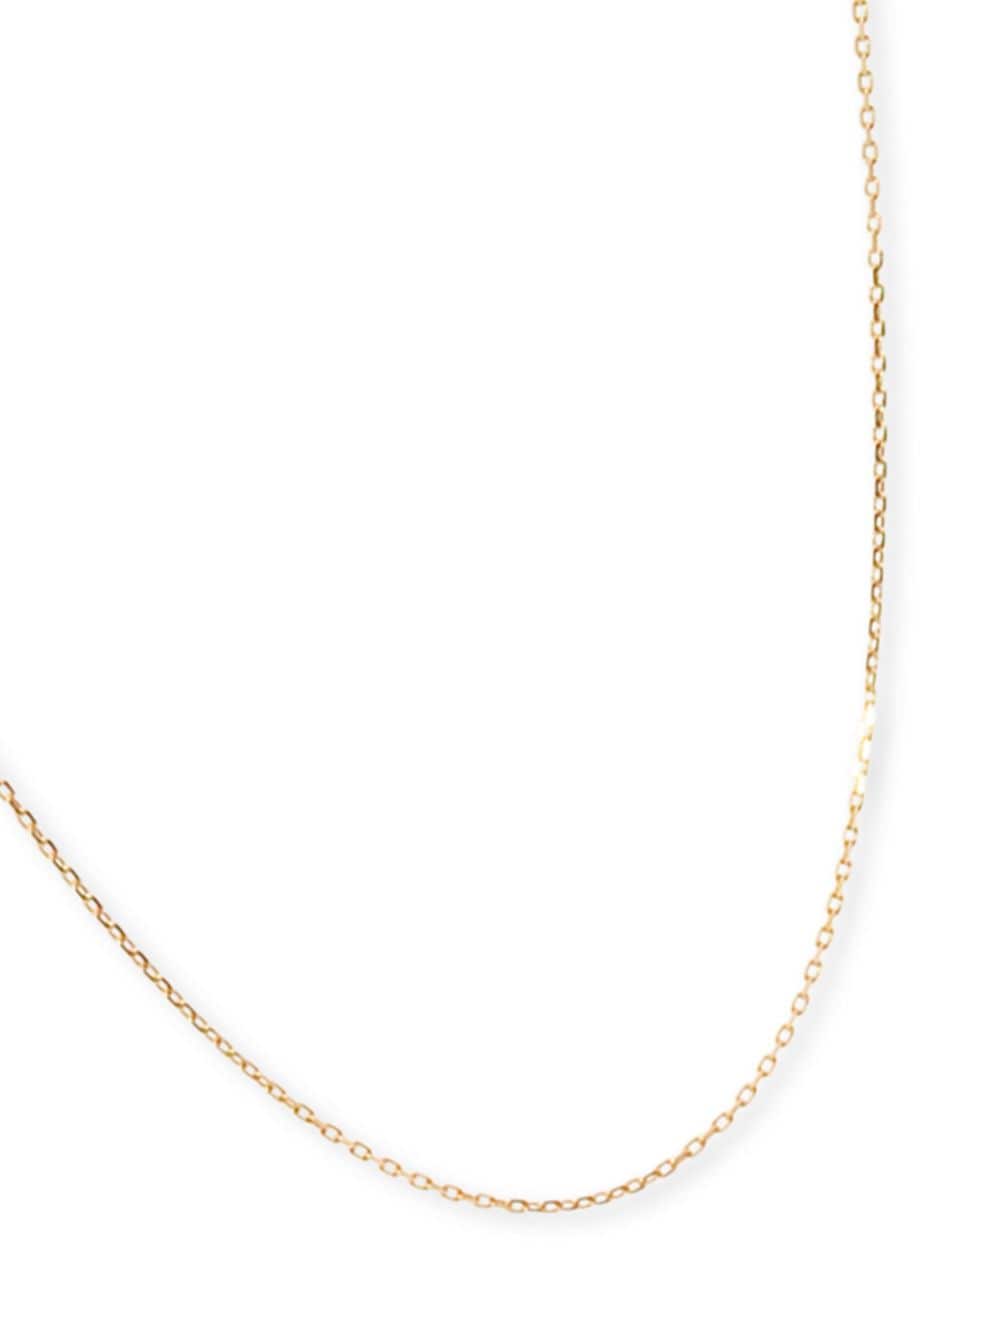 Shop The Alkemistry 18kt Recycled Yellow Gold Nude Shimmer Chain Necklace